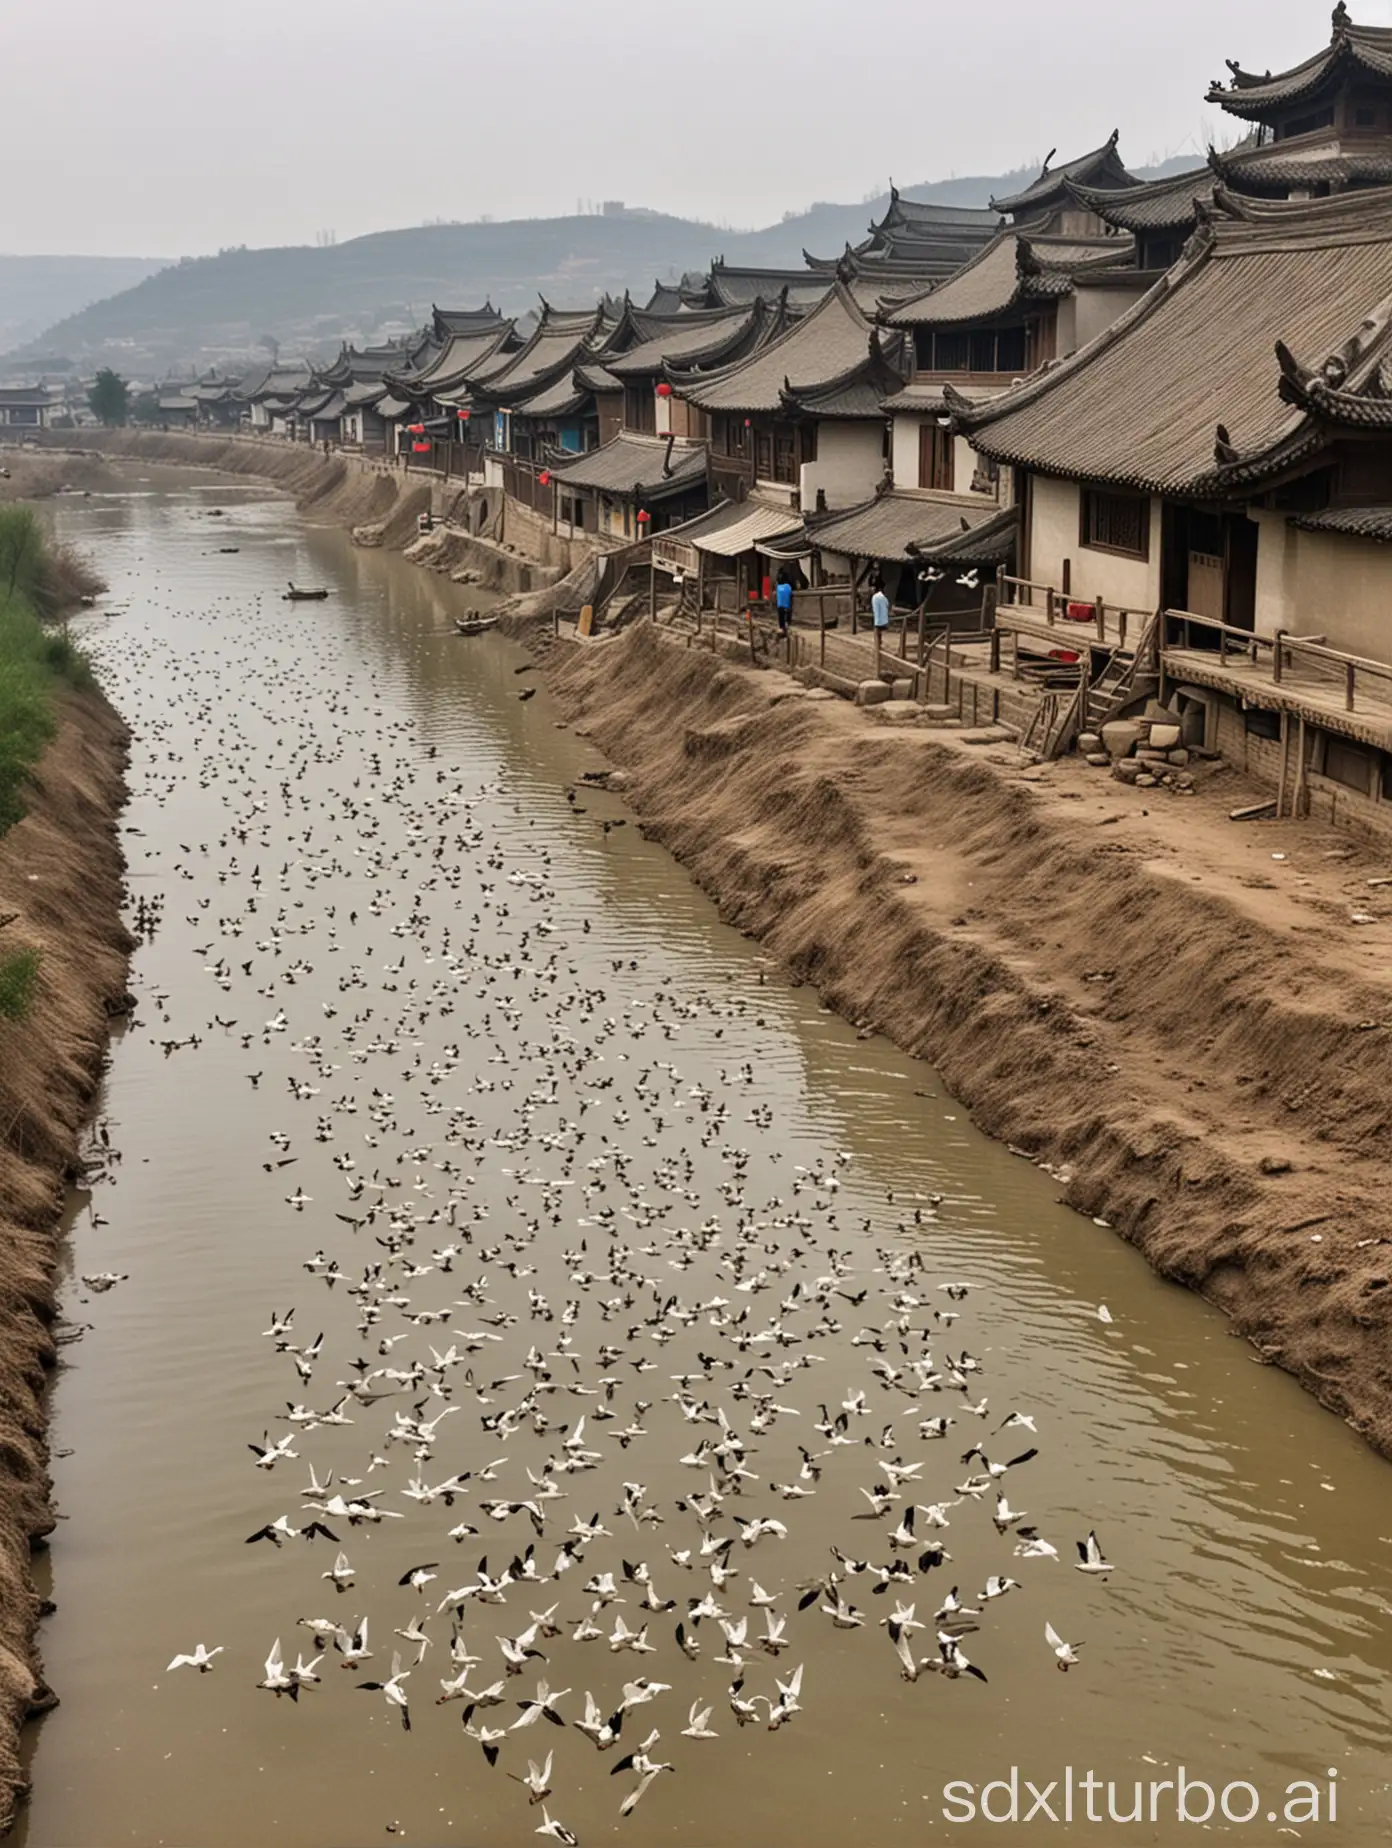 Where does the village letter reach? Returning geese near Luoyang's border.